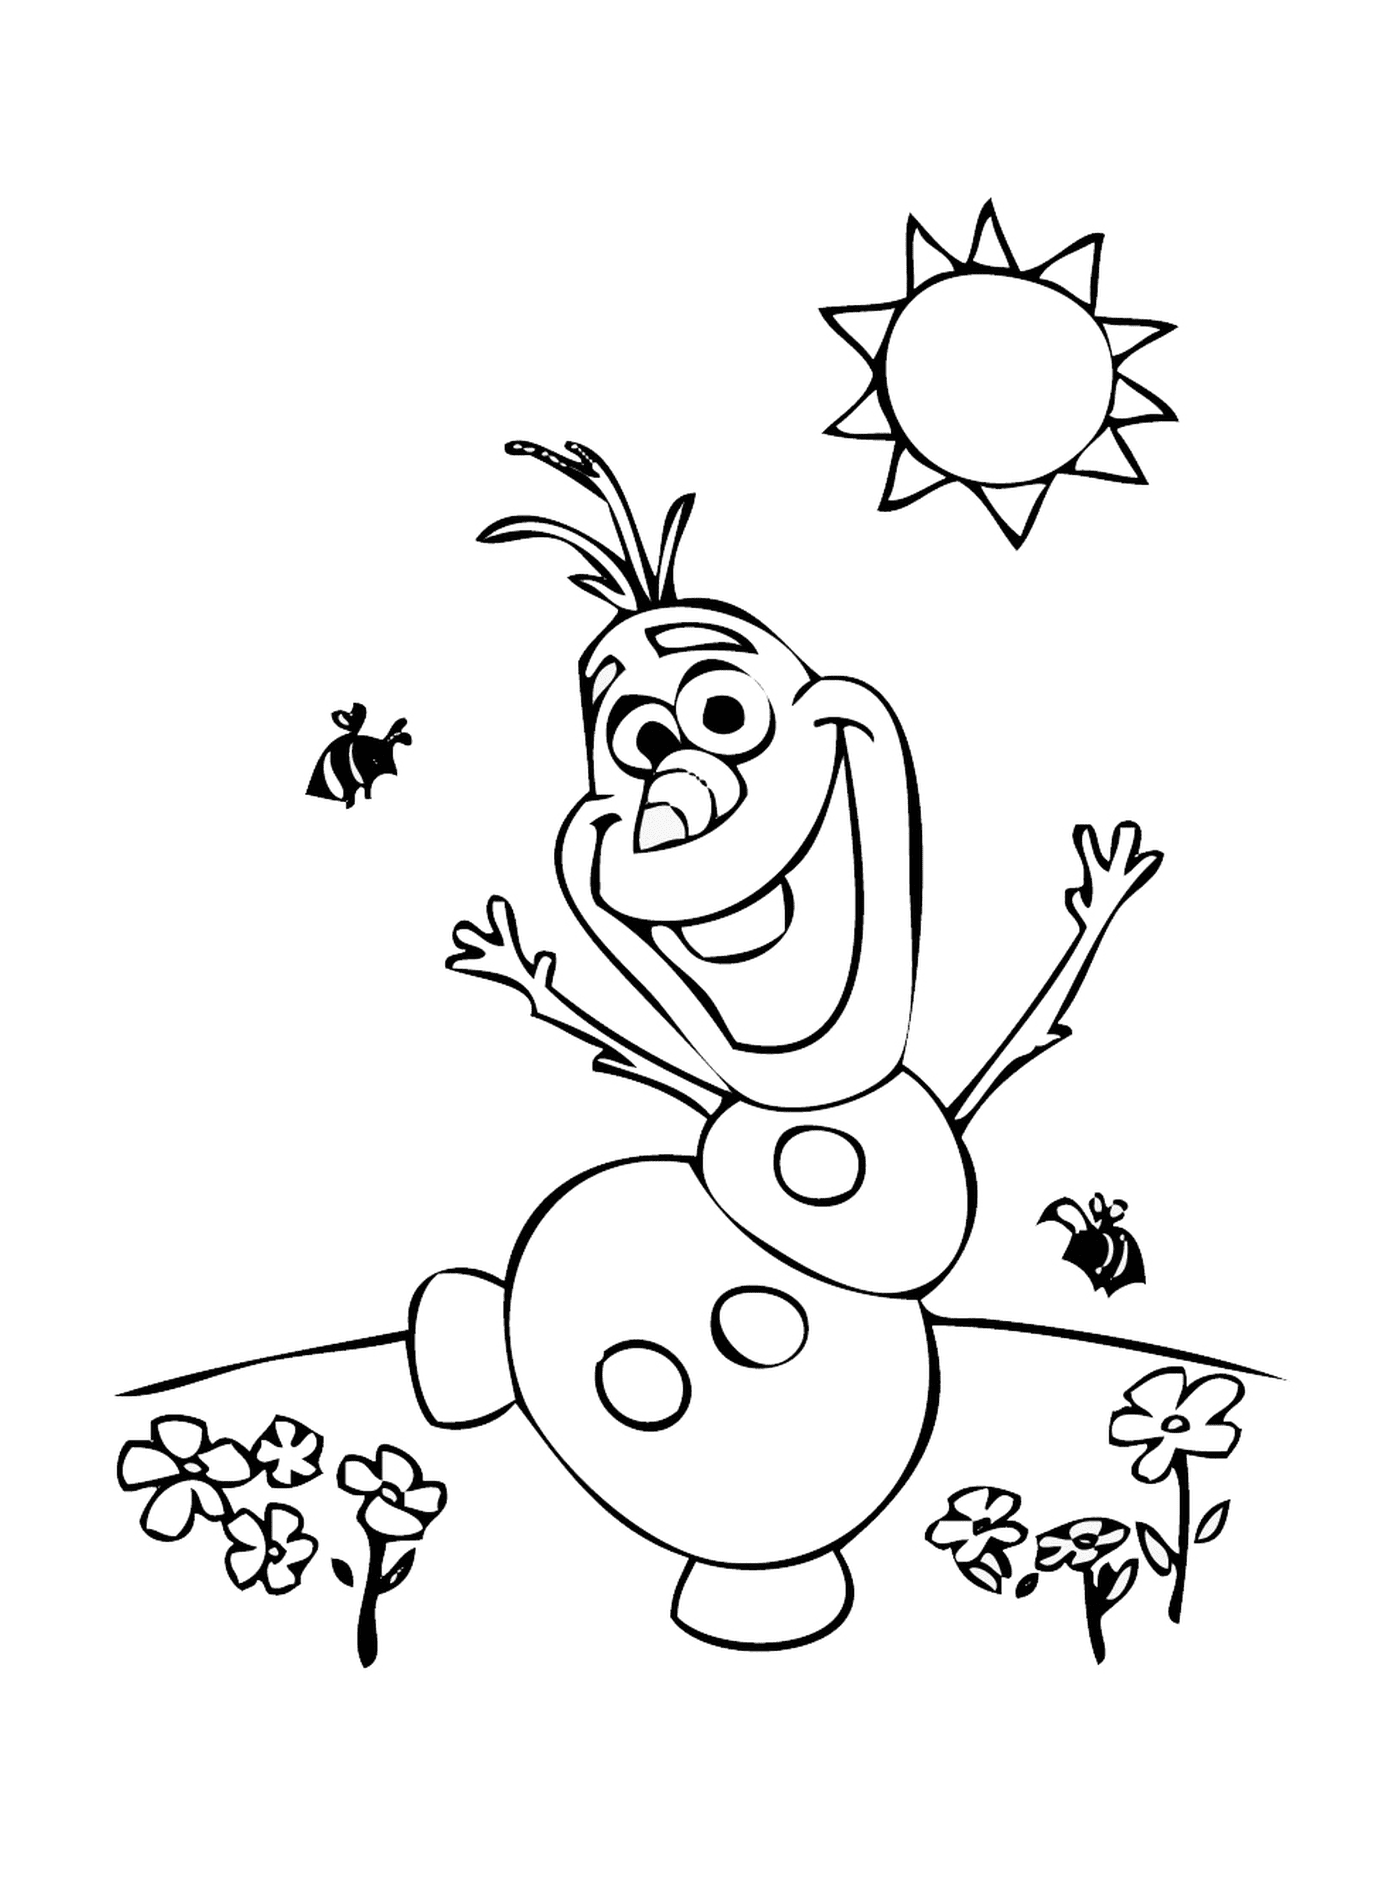  Olaf in the sun with flowers and bees 